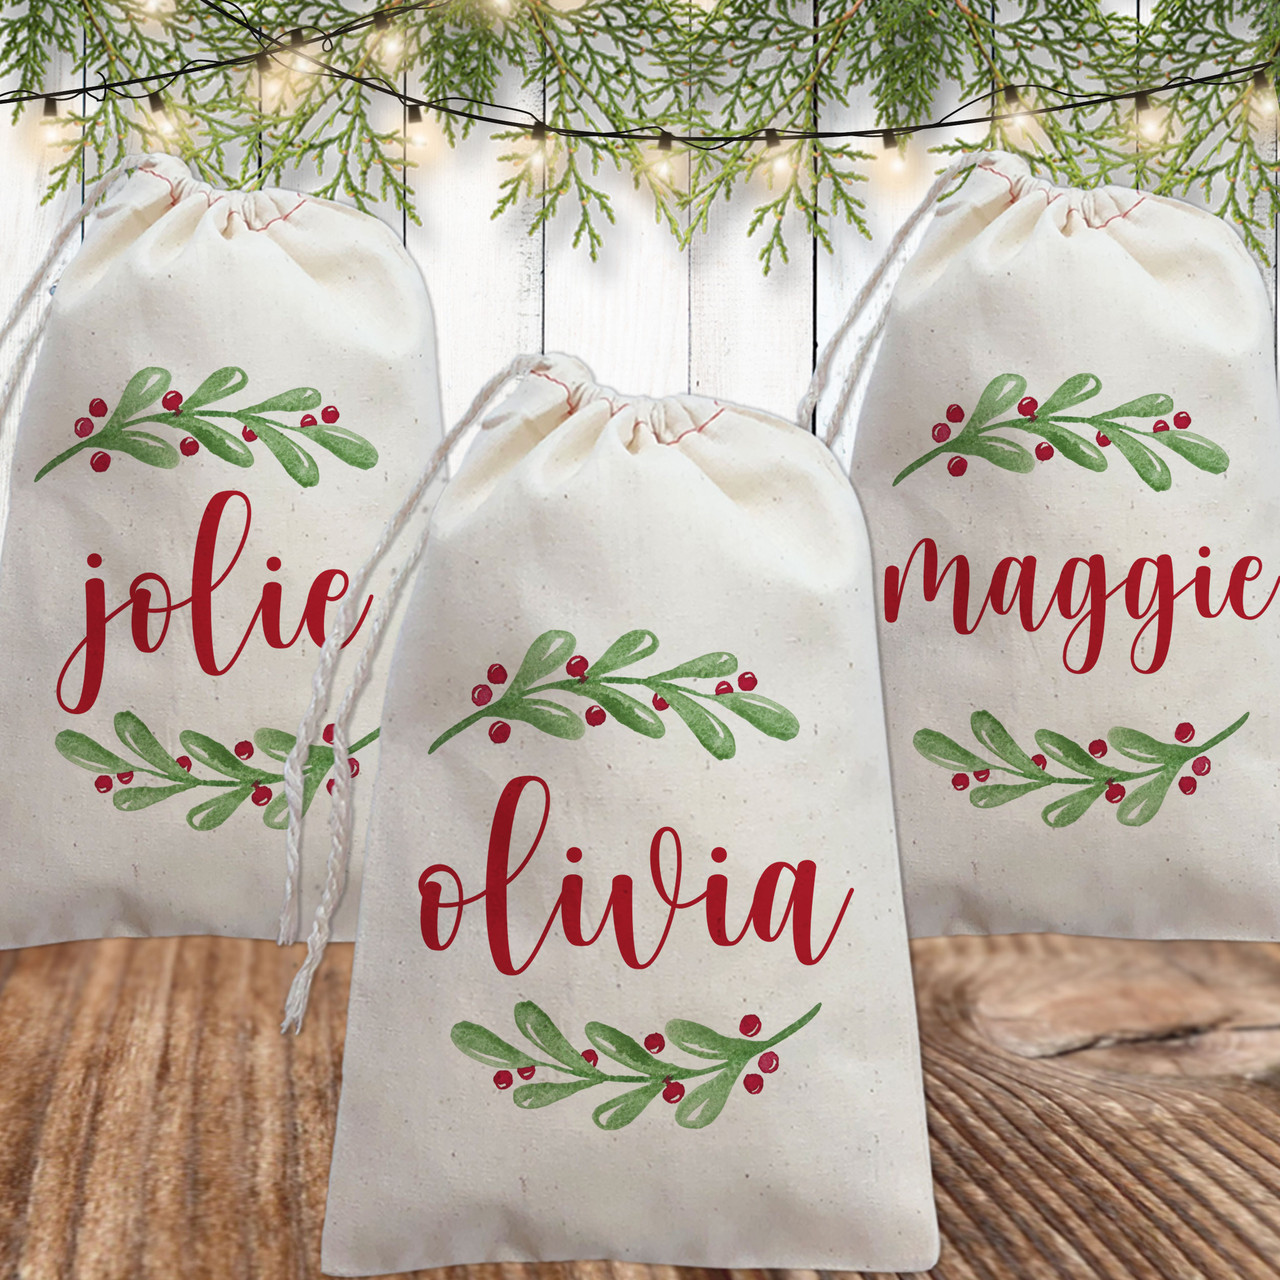 https://cdn11.bigcommerce.com/s-5grzuu6/images/stencil/1280x1280/products/5880/43746/Watercolor-Holly-Custom_Christmas_Gift-Bags__35263.1635544434.jpg?c=2